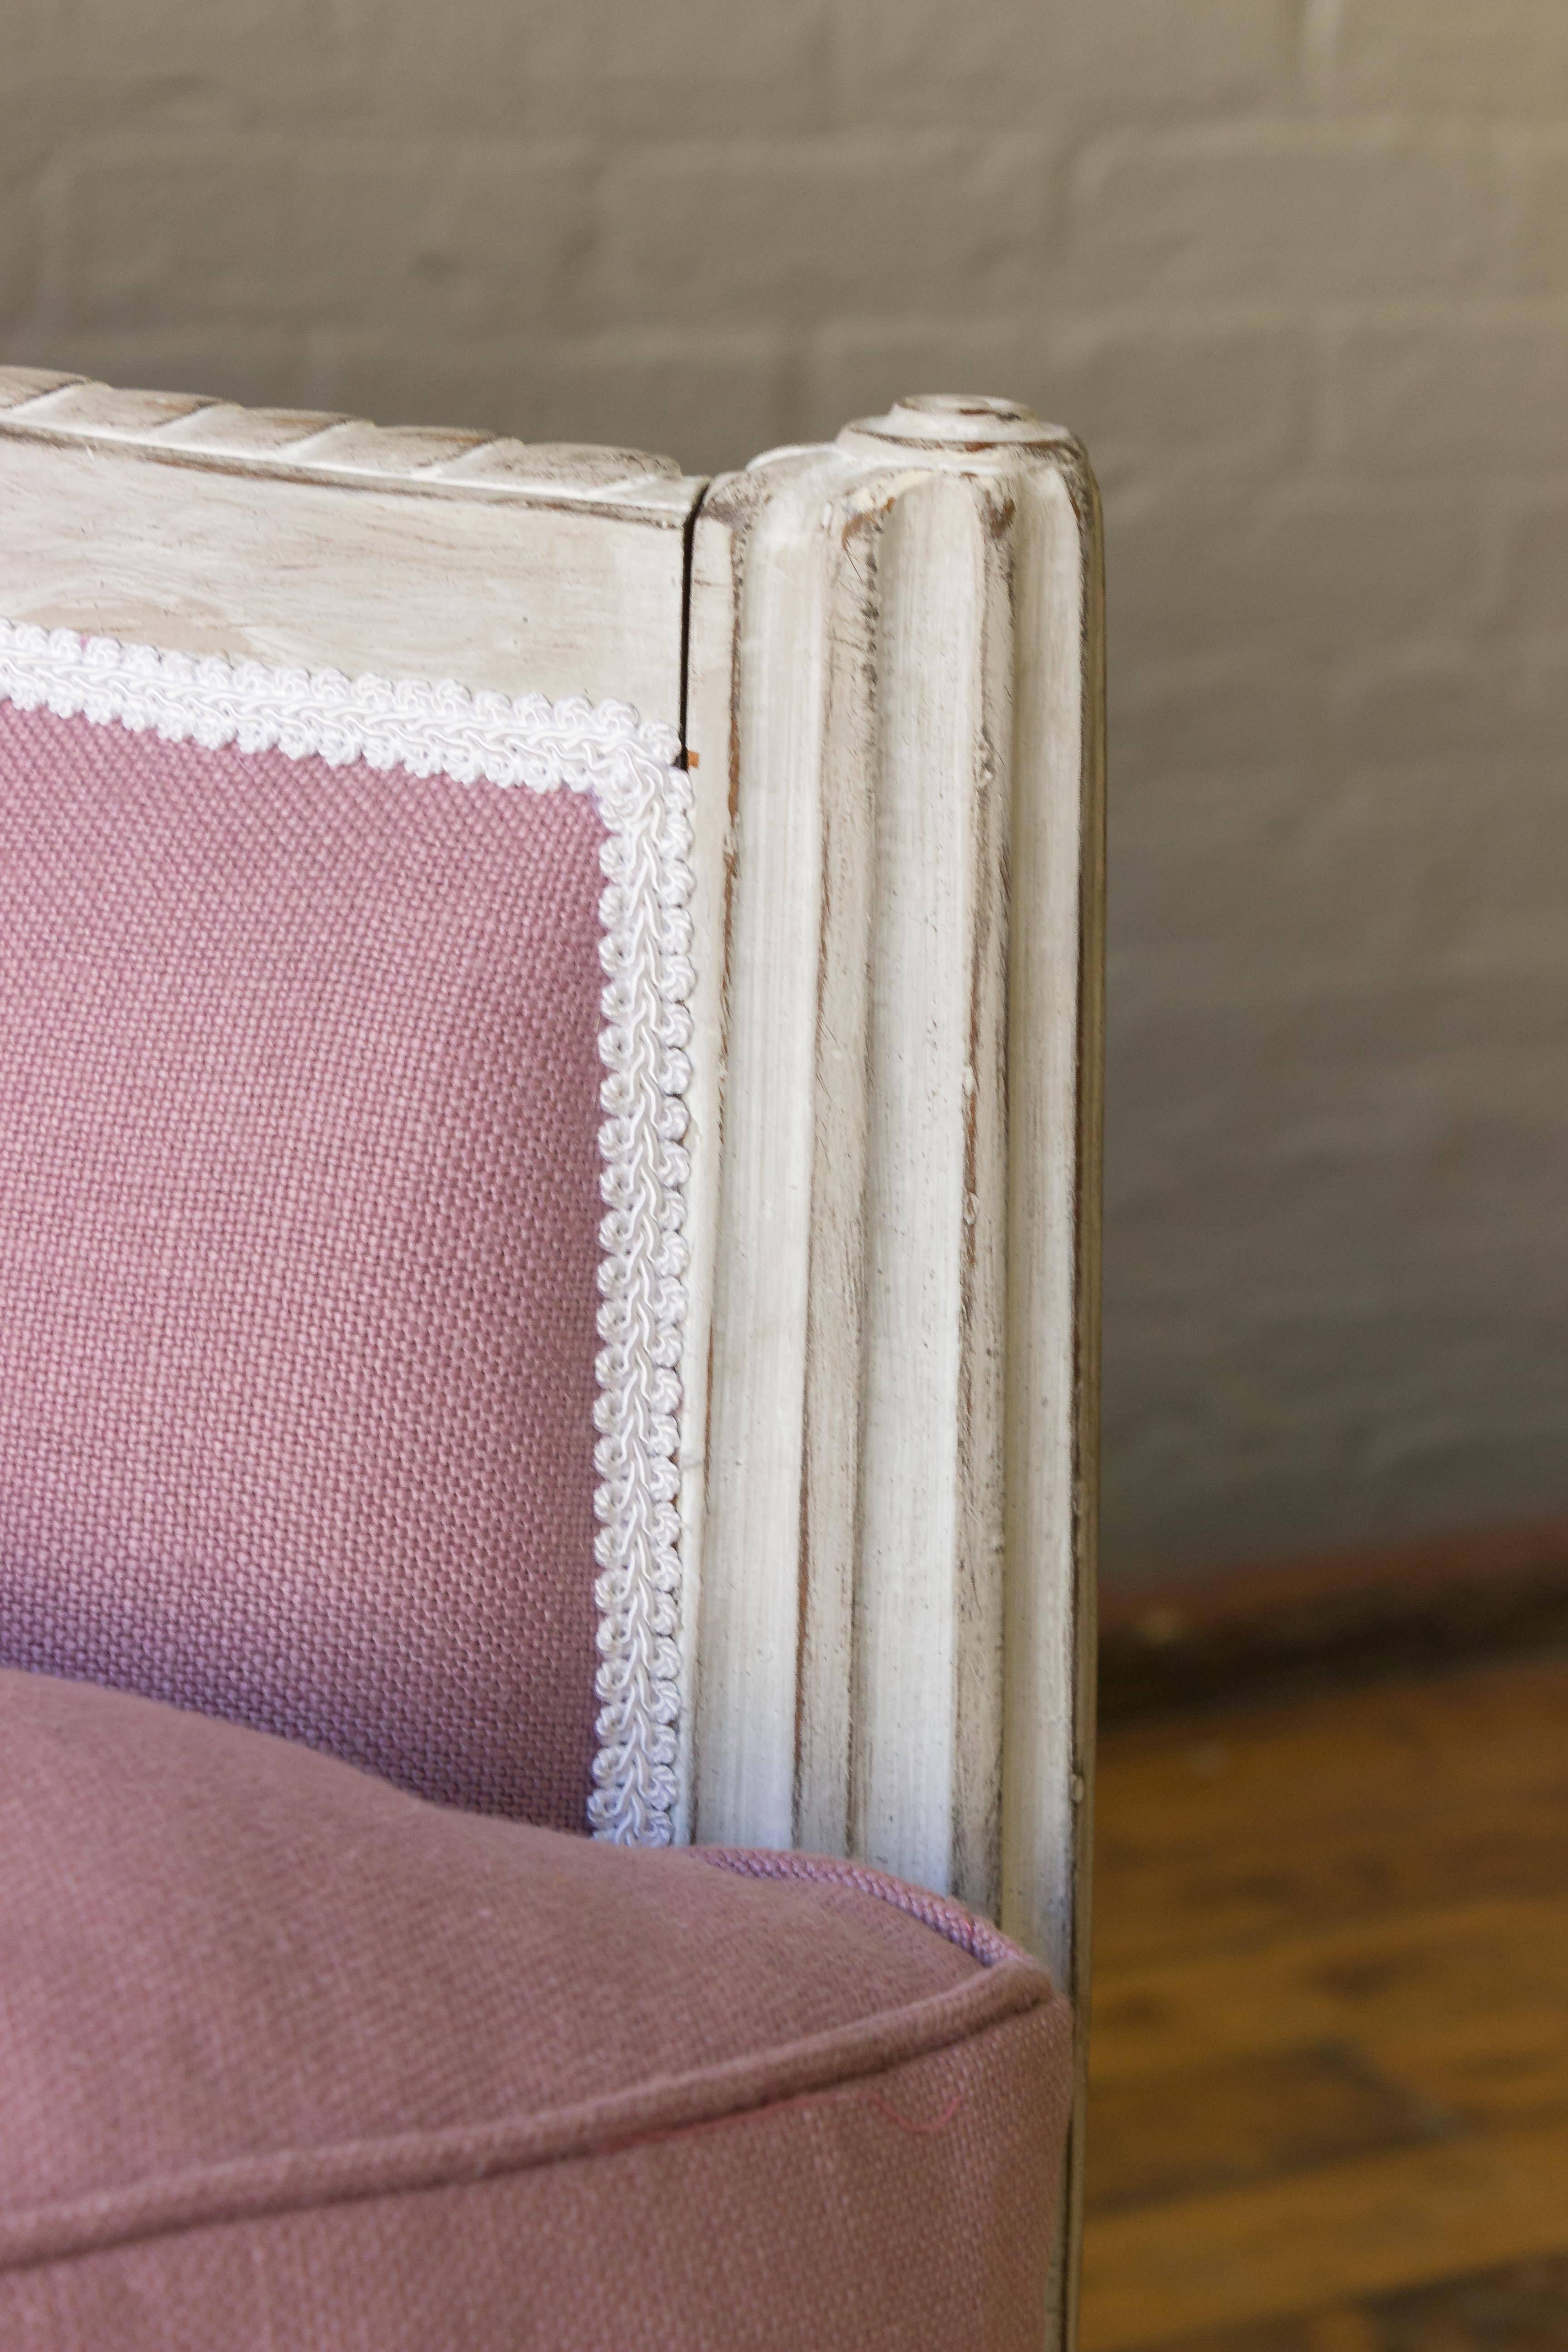 20th Century Art Deco Style Settee Upholstered in Lavender Linen 3